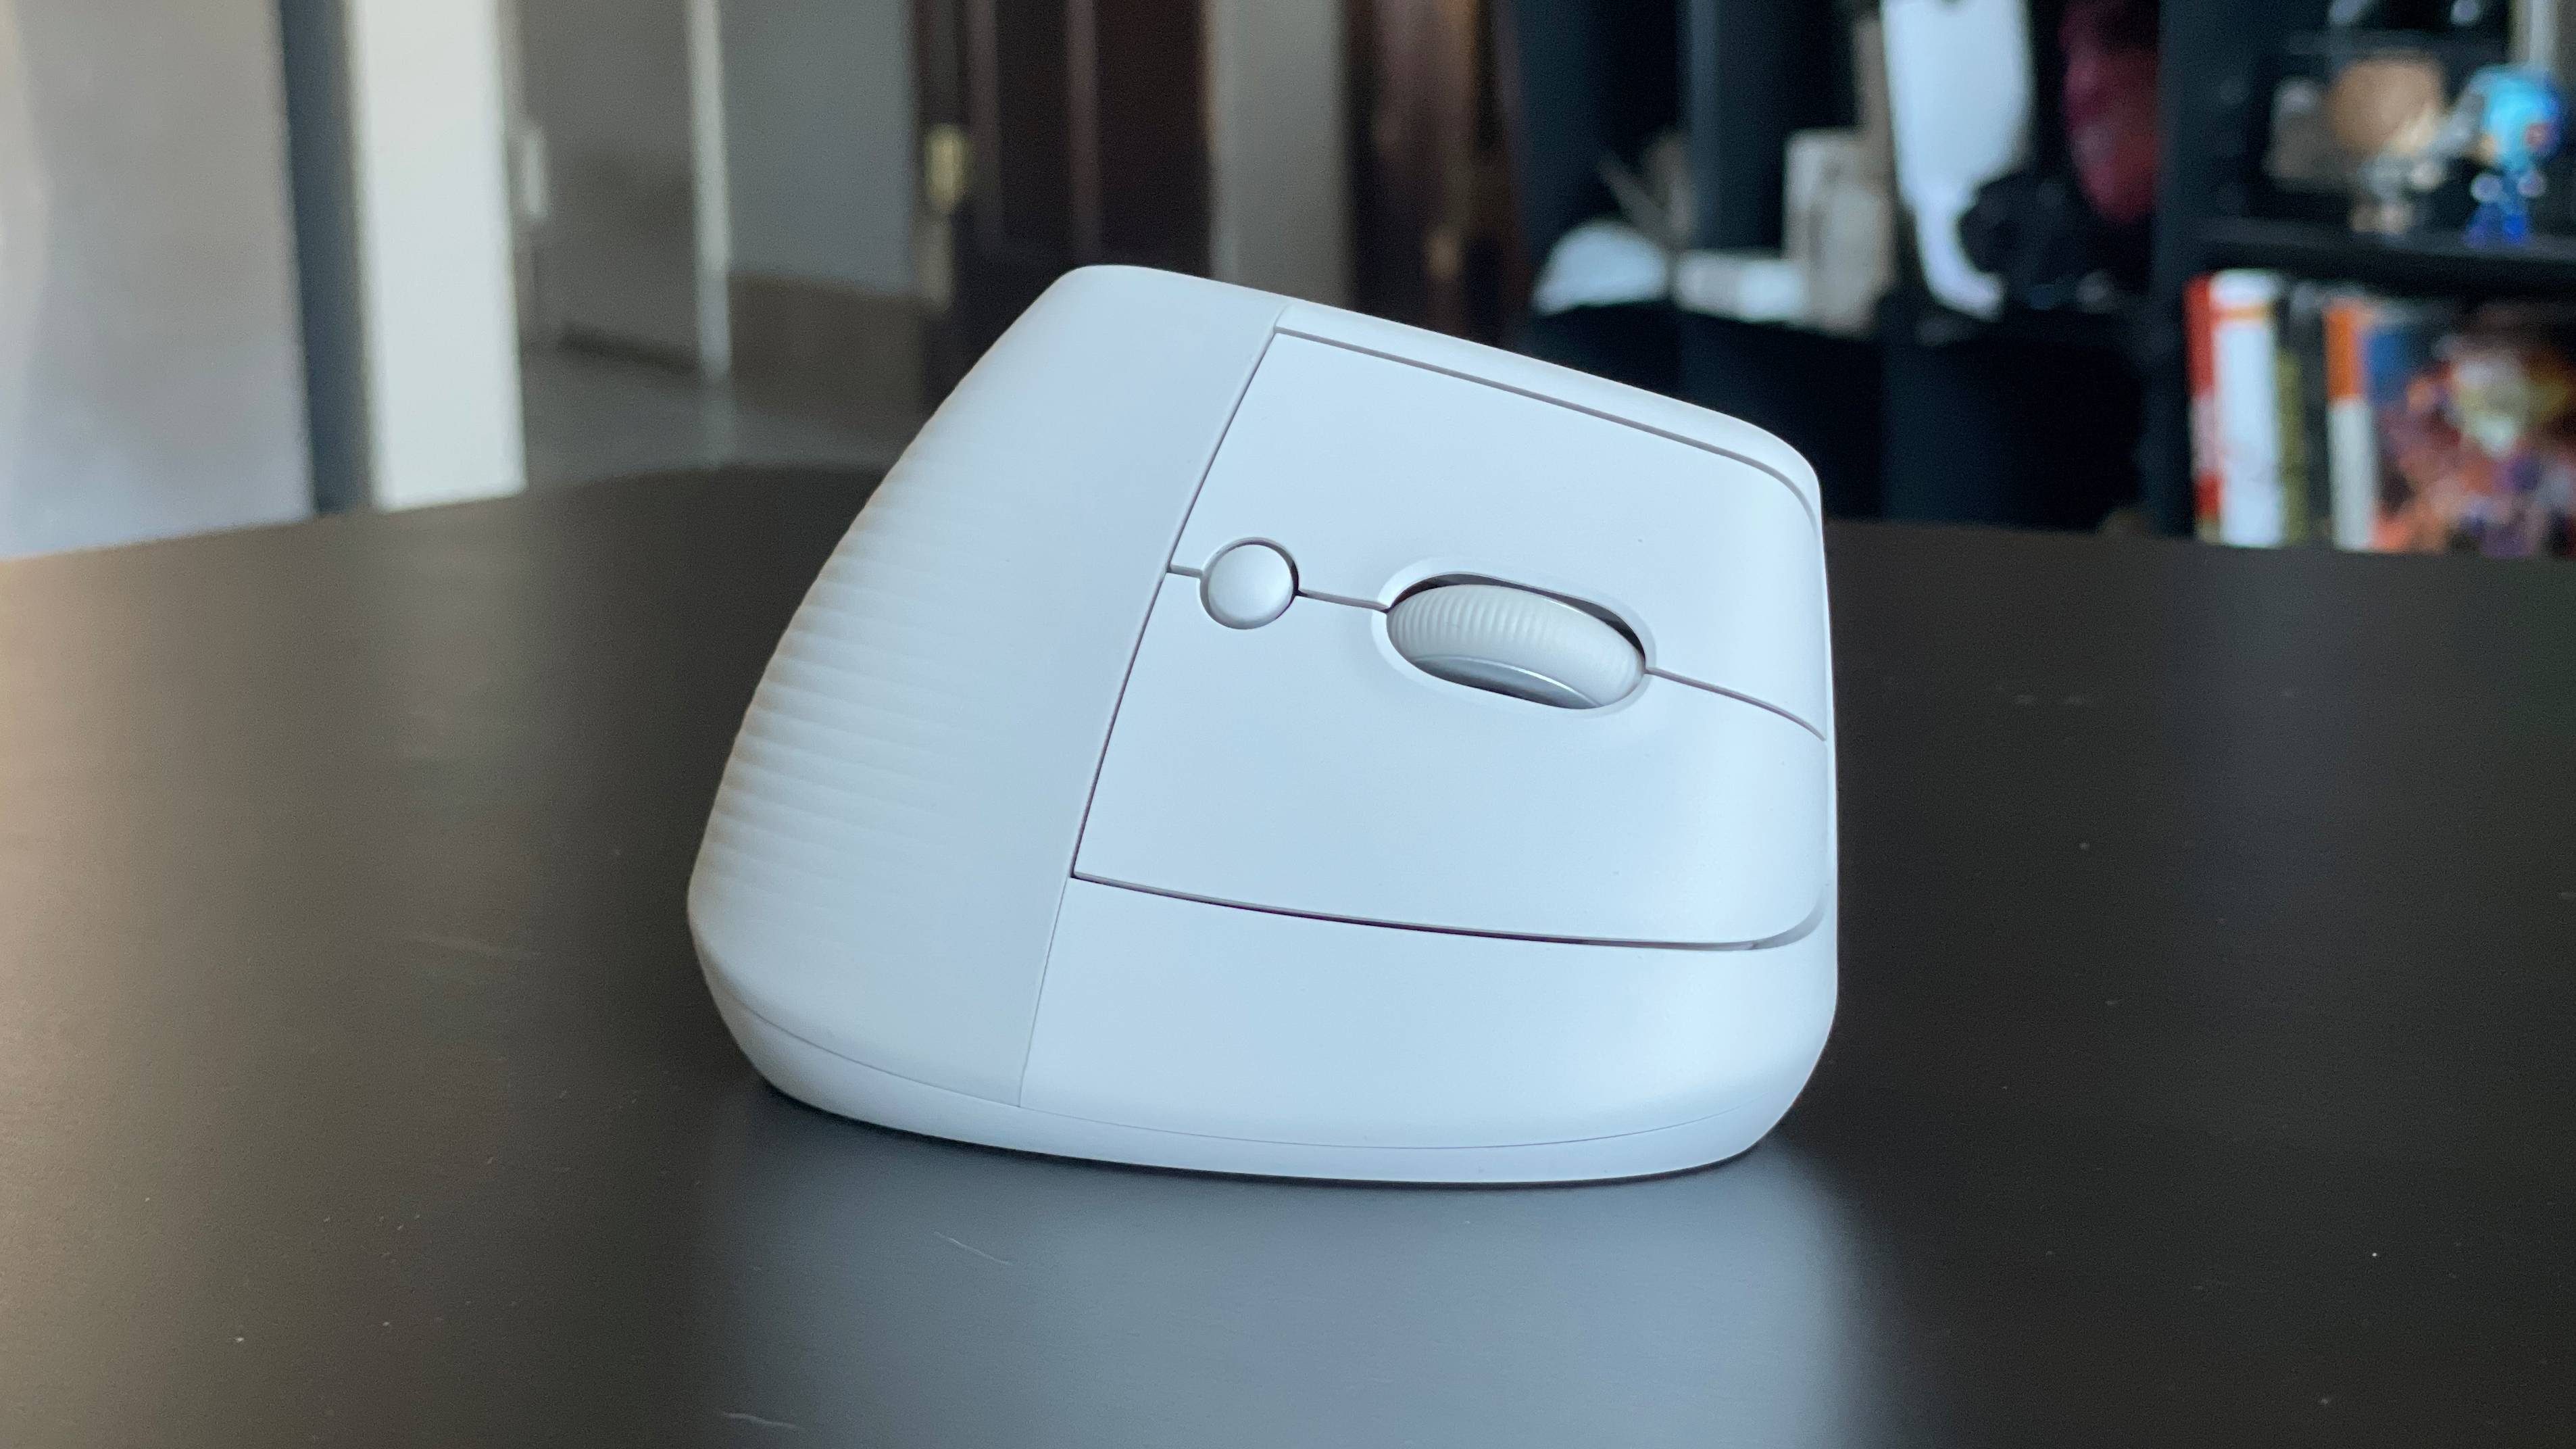 Logitech Lift Vertical Ergonomic Mouse, hands on: Compact and